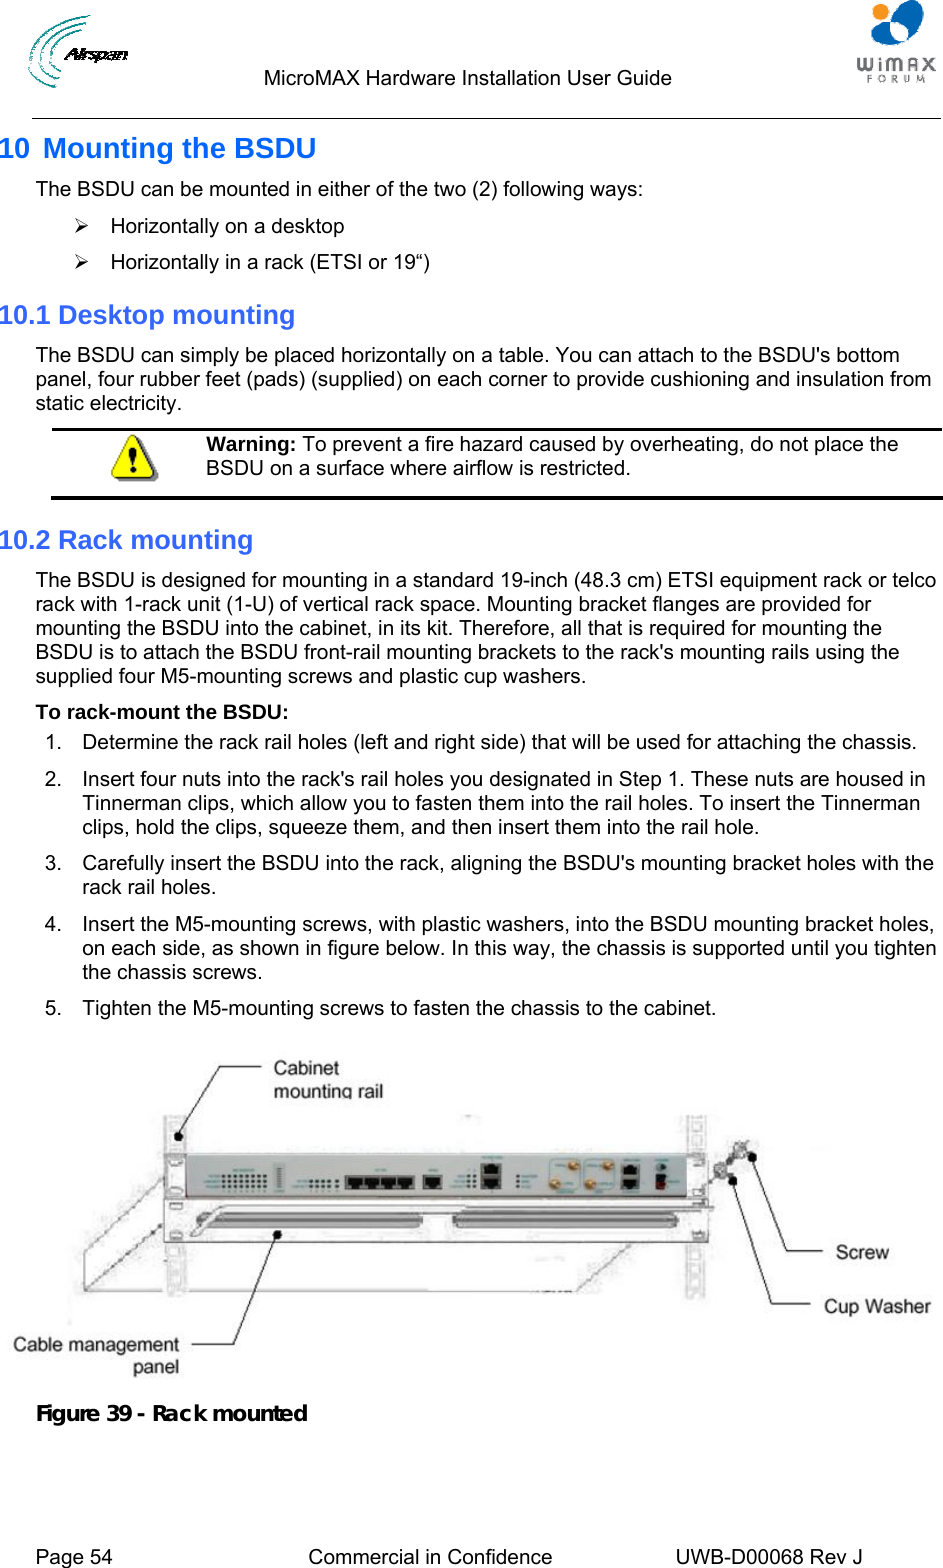                                  MicroMAX Hardware Installation User Guide     Page 54  Commercial in Confidence  UWB-D00068 Rev J   10 Mounting the BSDU The BSDU can be mounted in either of the two (2) following ways:  ¾  Horizontally on a desktop ¾  Horizontally in a rack (ETSI or 19“)  10.1 Desktop mounting The BSDU can simply be placed horizontally on a table. You can attach to the BSDU&apos;s bottom panel, four rubber feet (pads) (supplied) on each corner to provide cushioning and insulation from static electricity.  Warning: To prevent a fire hazard caused by overheating, do not place the BSDU on a surface where airflow is restricted. 10.2 Rack mounting The BSDU is designed for mounting in a standard 19-inch (48.3 cm) ETSI equipment rack or telco rack with 1-rack unit (1-U) of vertical rack space. Mounting bracket flanges are provided for mounting the BSDU into the cabinet, in its kit. Therefore, all that is required for mounting the BSDU is to attach the BSDU front-rail mounting brackets to the rack&apos;s mounting rails using the supplied four M5-mounting screws and plastic cup washers. To rack-mount the BSDU: 1.  Determine the rack rail holes (left and right side) that will be used for attaching the chassis. 2.  Insert four nuts into the rack&apos;s rail holes you designated in Step 1. These nuts are housed in Tinnerman clips, which allow you to fasten them into the rail holes. To insert the Tinnerman clips, hold the clips, squeeze them, and then insert them into the rail hole. 3.  Carefully insert the BSDU into the rack, aligning the BSDU&apos;s mounting bracket holes with the rack rail holes. 4.  Insert the M5-mounting screws, with plastic washers, into the BSDU mounting bracket holes, on each side, as shown in figure below. In this way, the chassis is supported until you tighten the chassis screws. 5.  Tighten the M5-mounting screws to fasten the chassis to the cabinet.   Figure 39 - Rack mounted  